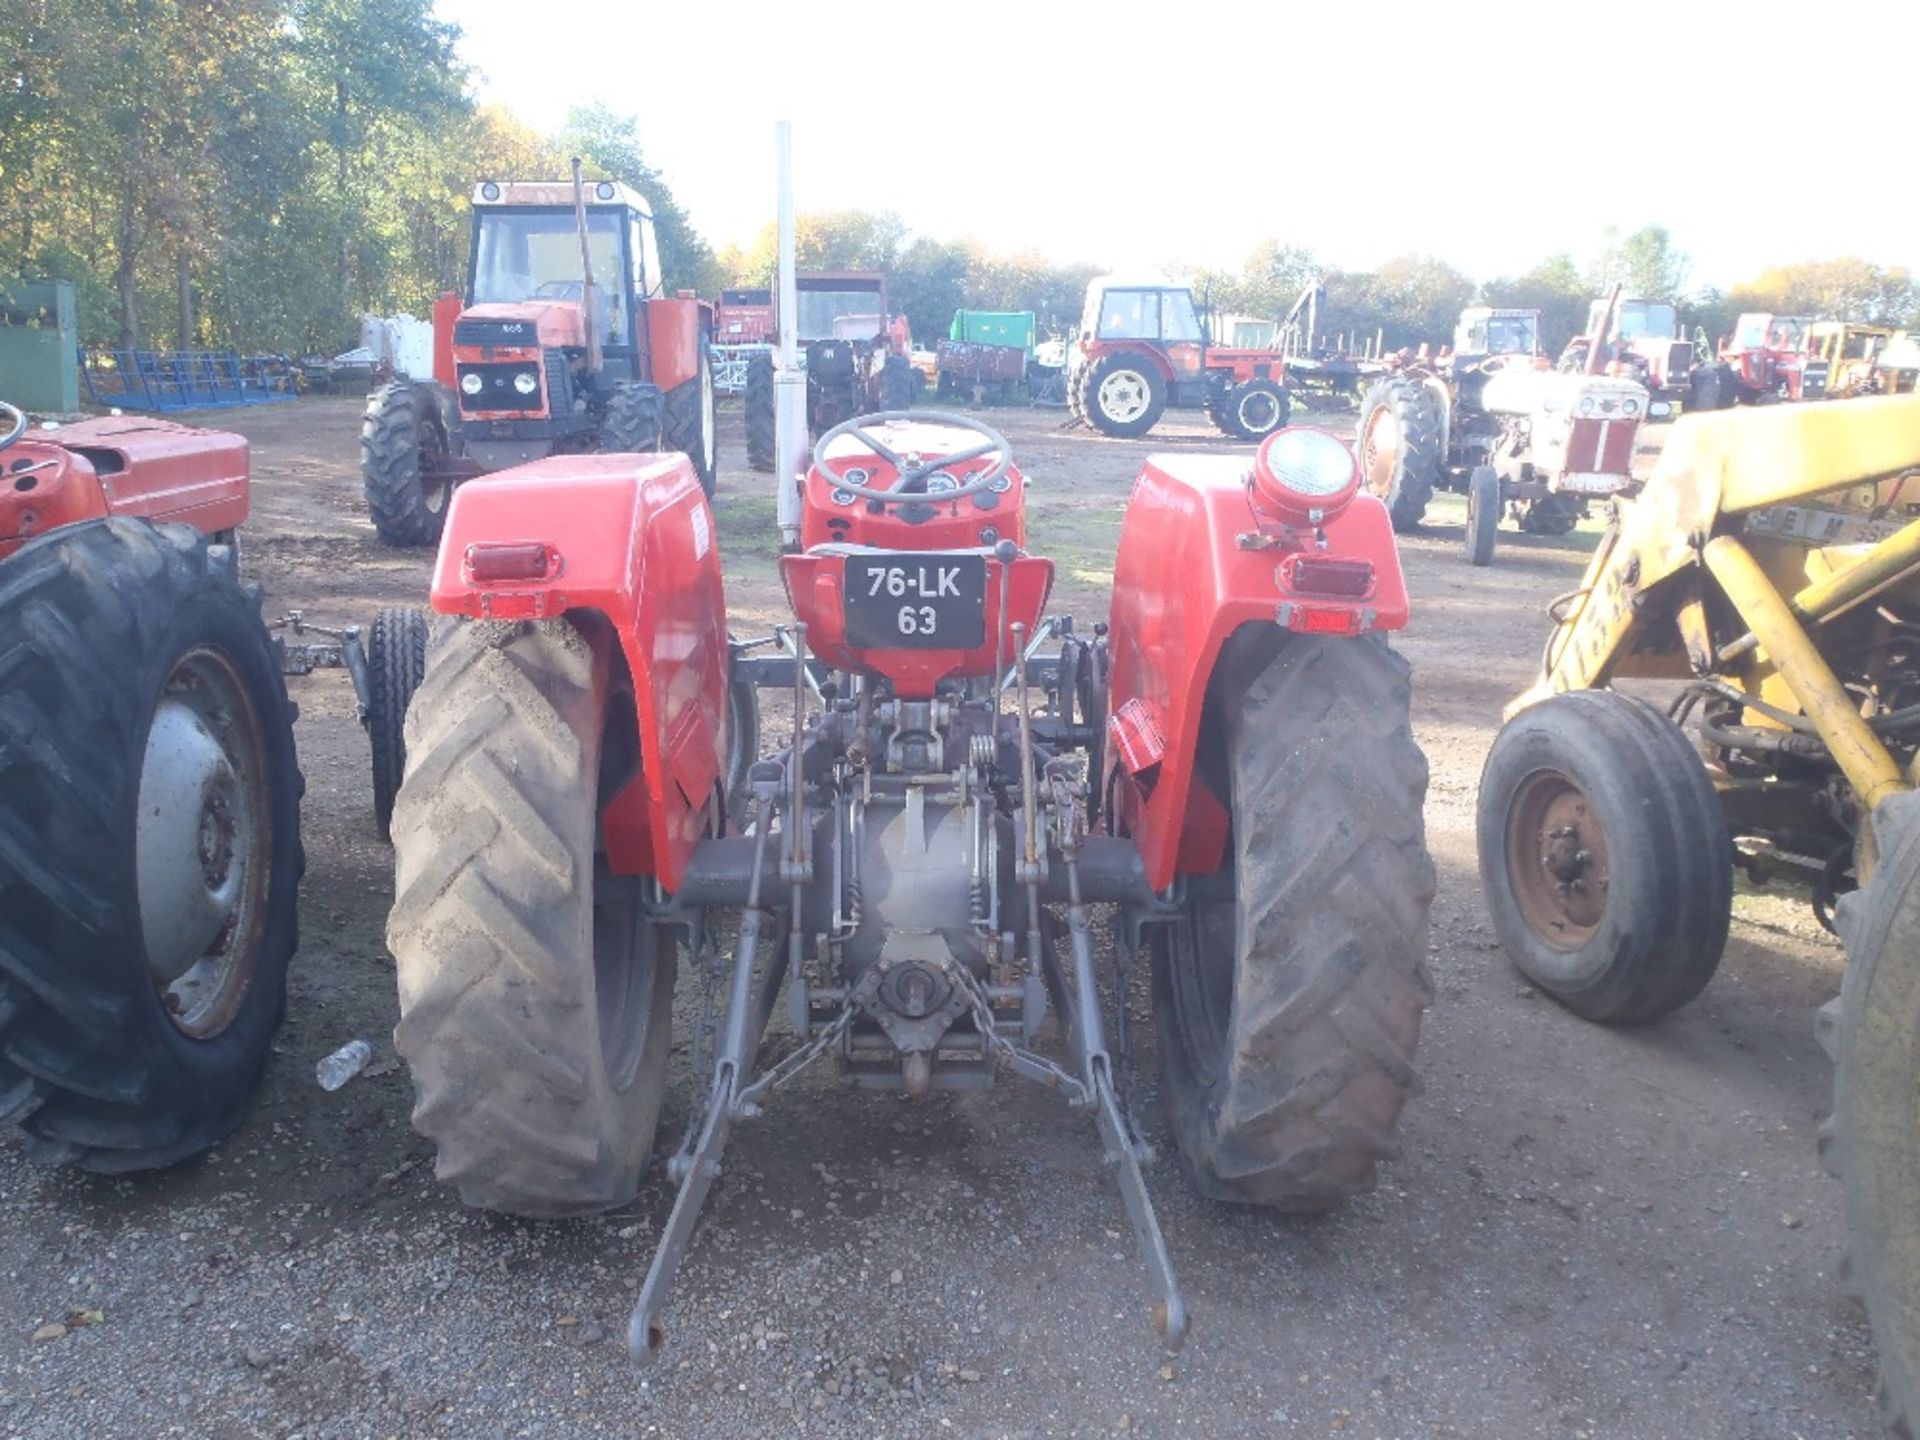 1976 Massey Ferguson 135 3 Cylinder Diesel Tractor. Goodyear Tyres, Long PTO, Cat 2 Lift Arms & Pick - Image 3 of 7